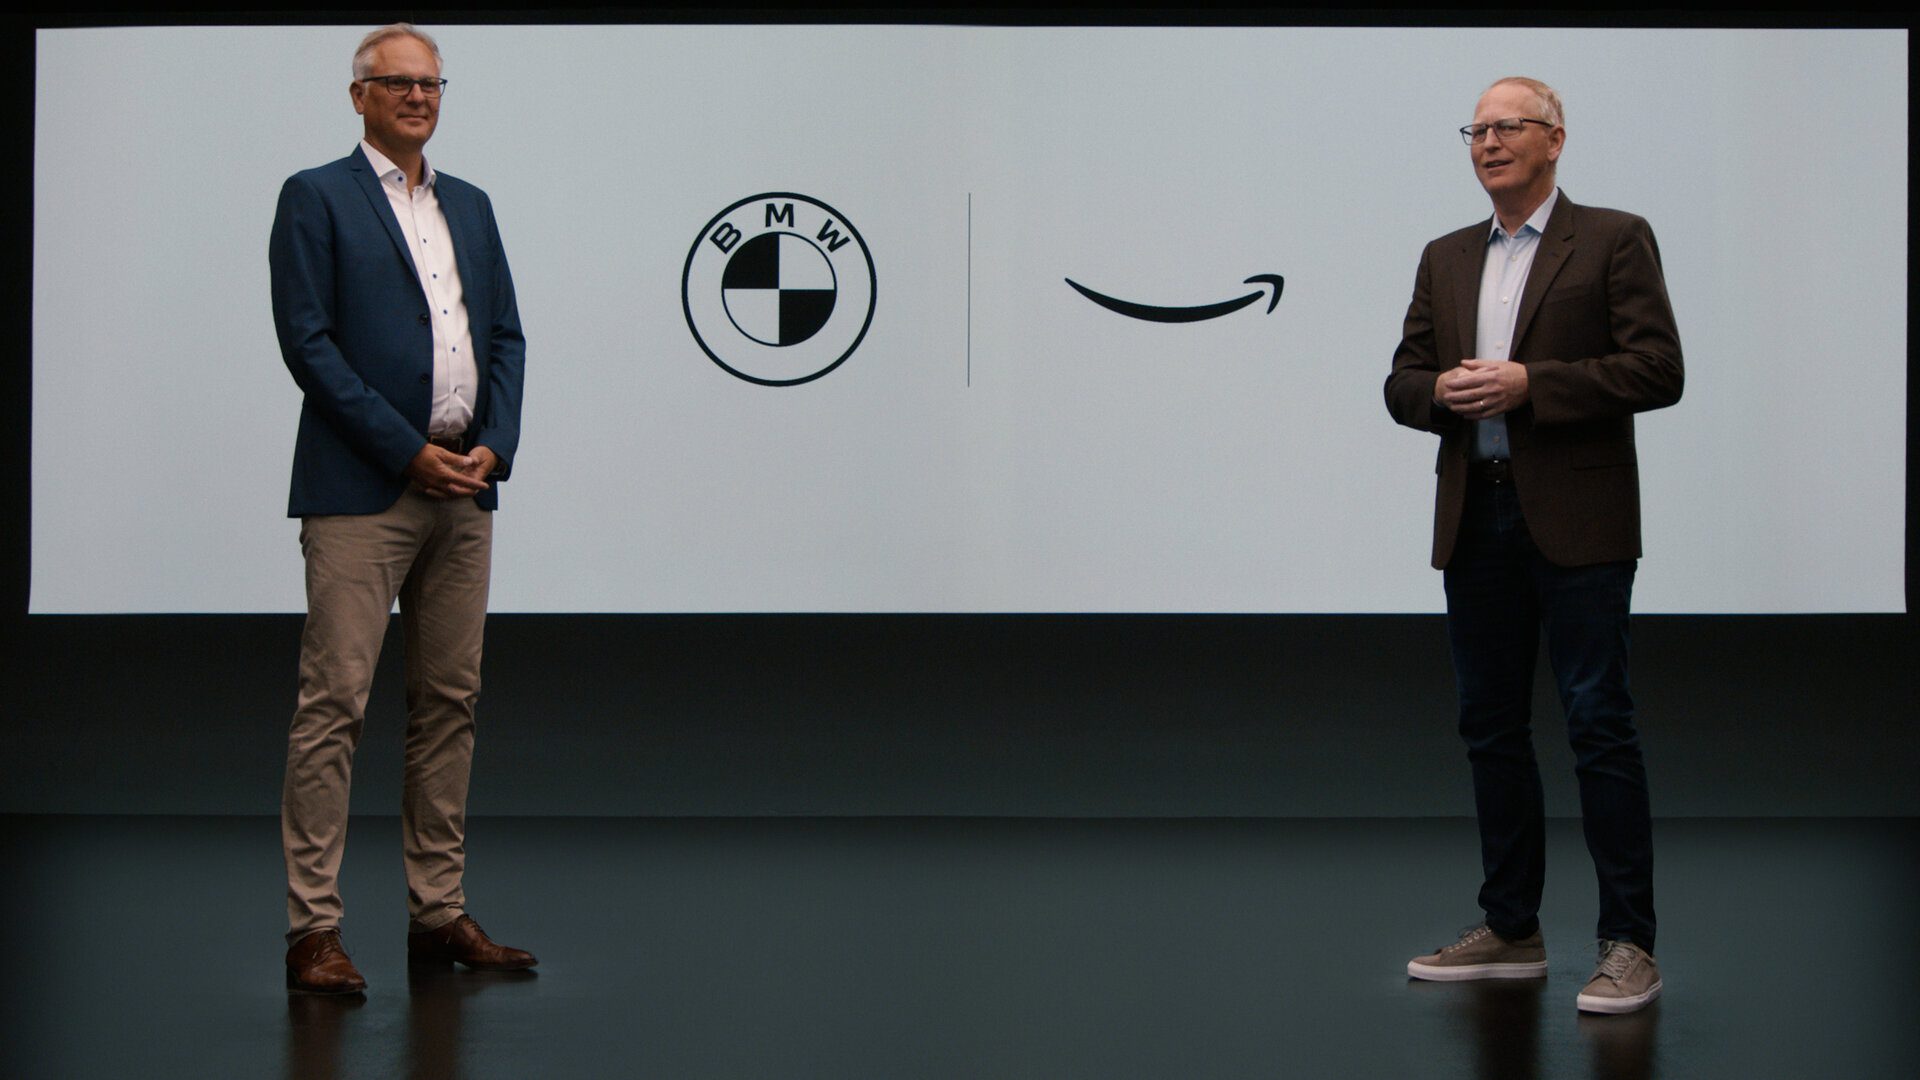 BMW and Amazon are collaborating on the next generation of BMW voice assistants